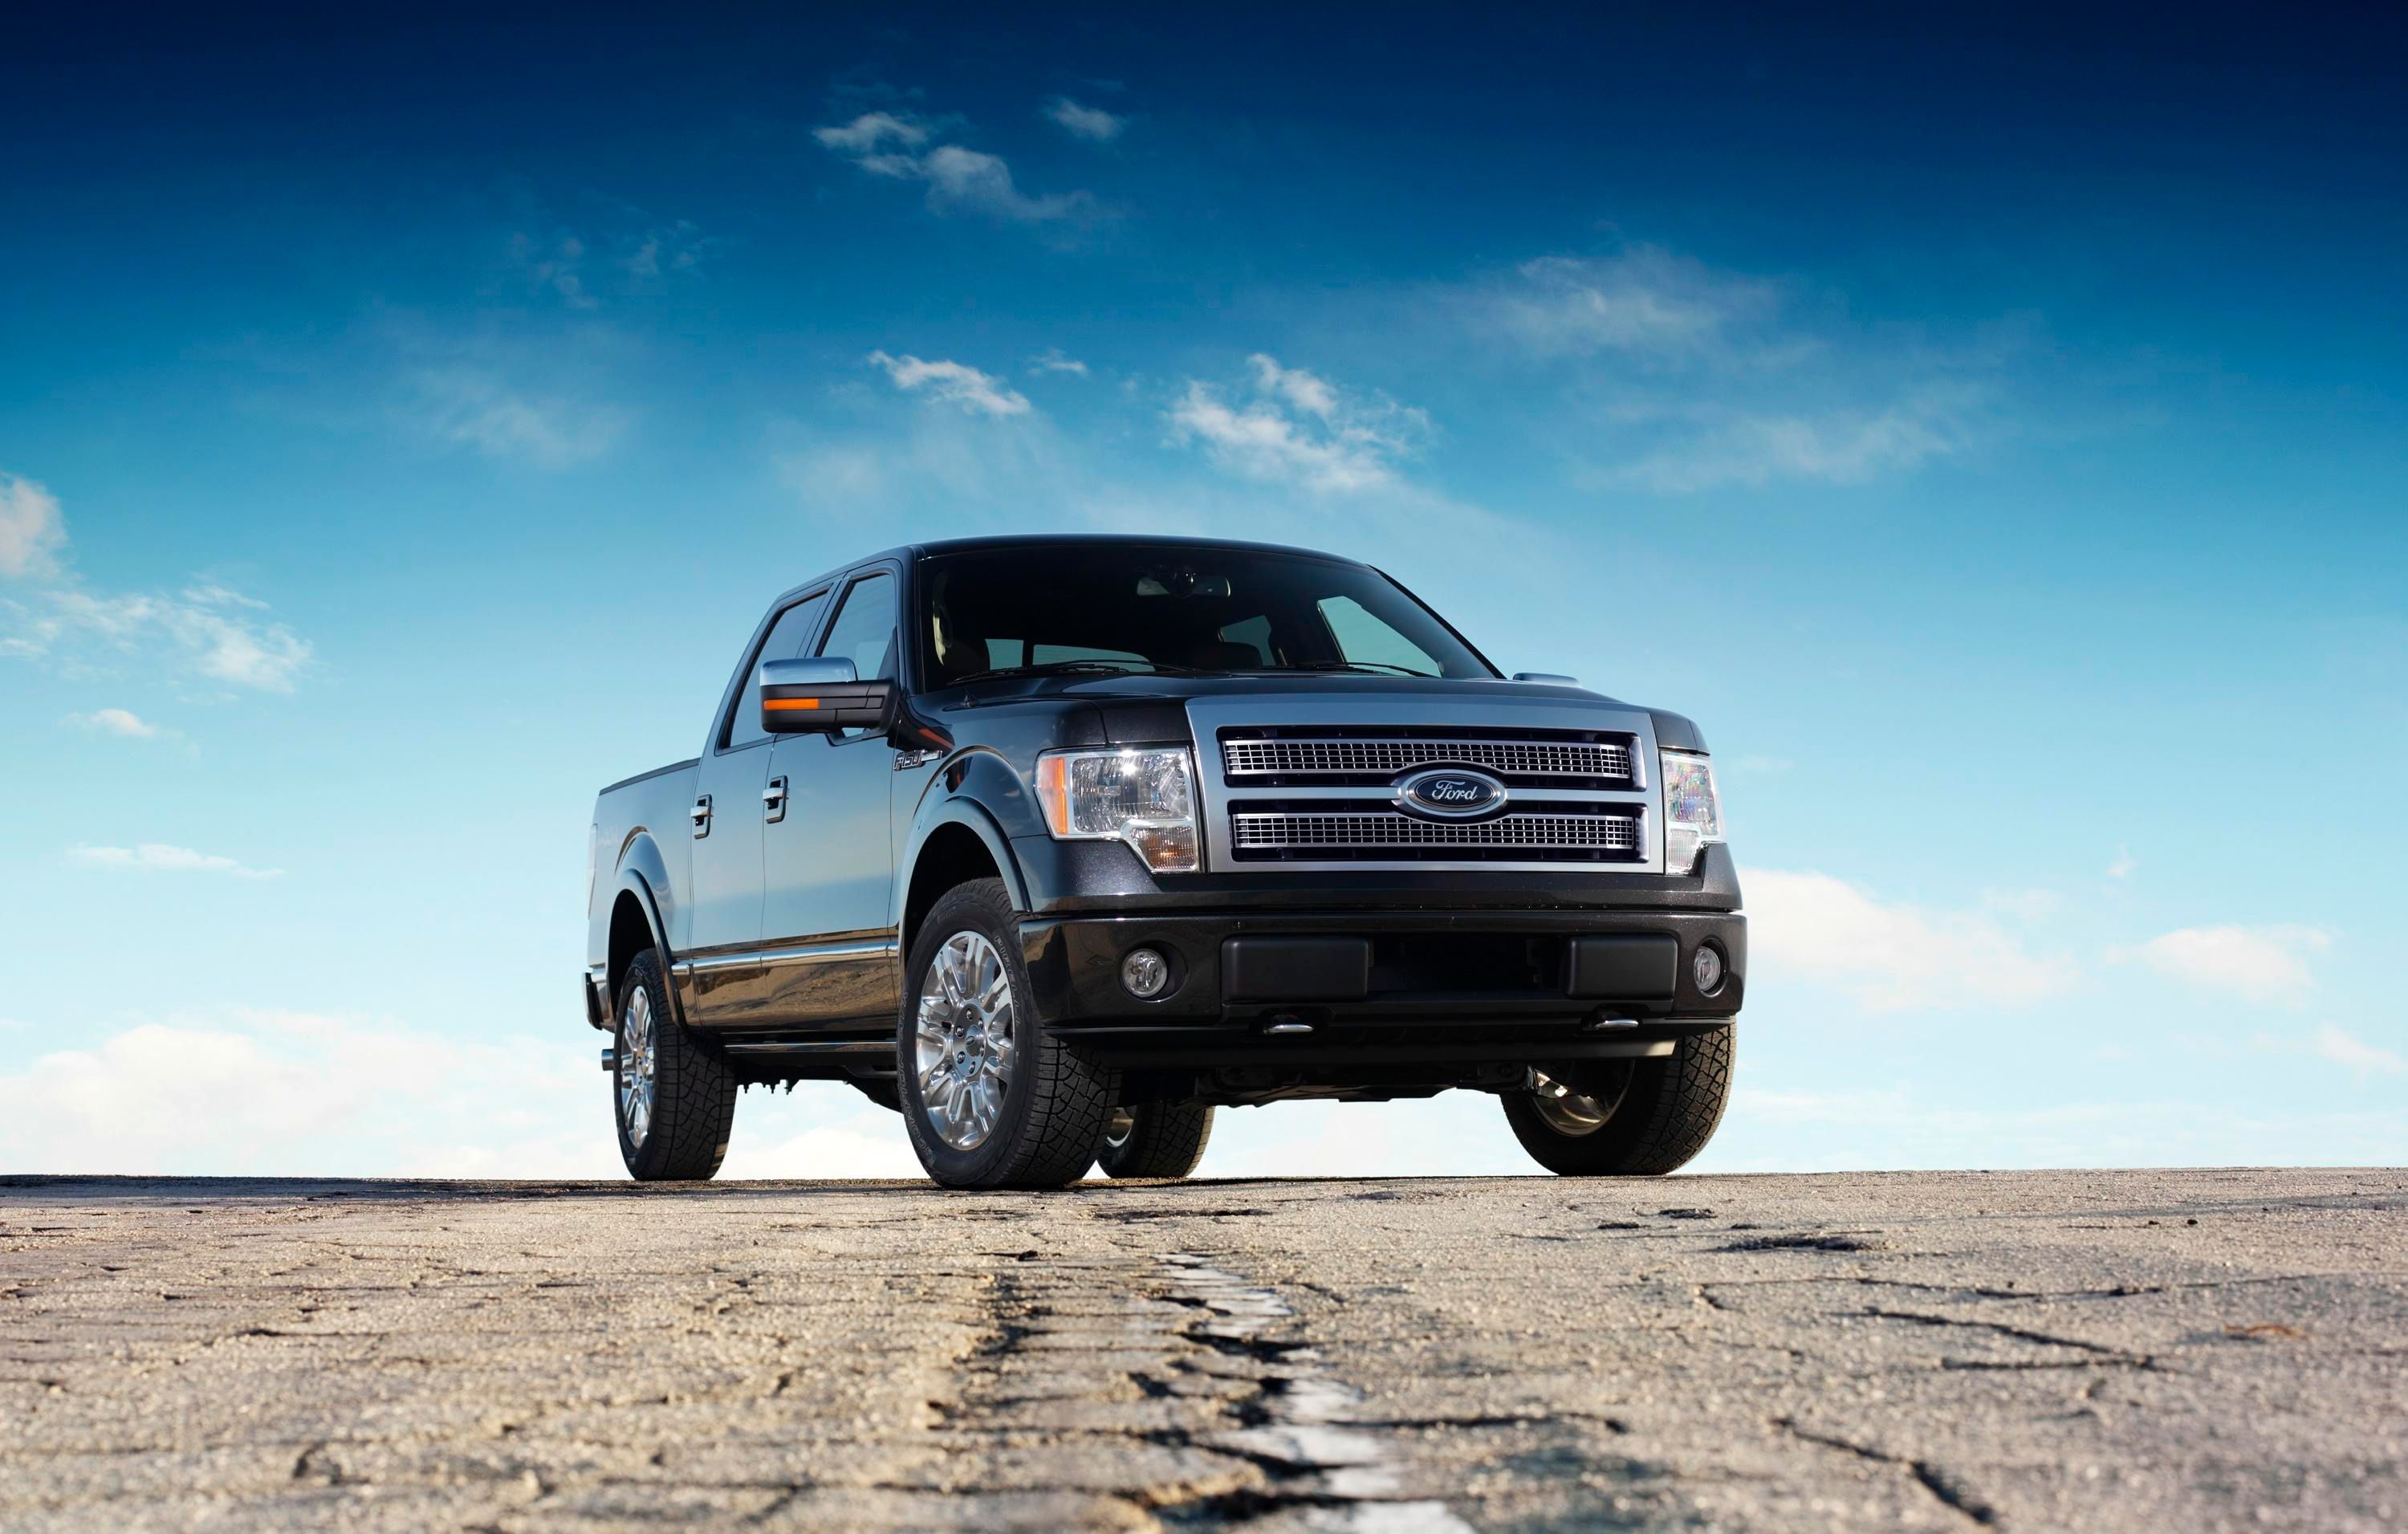 2009 Ford F-150